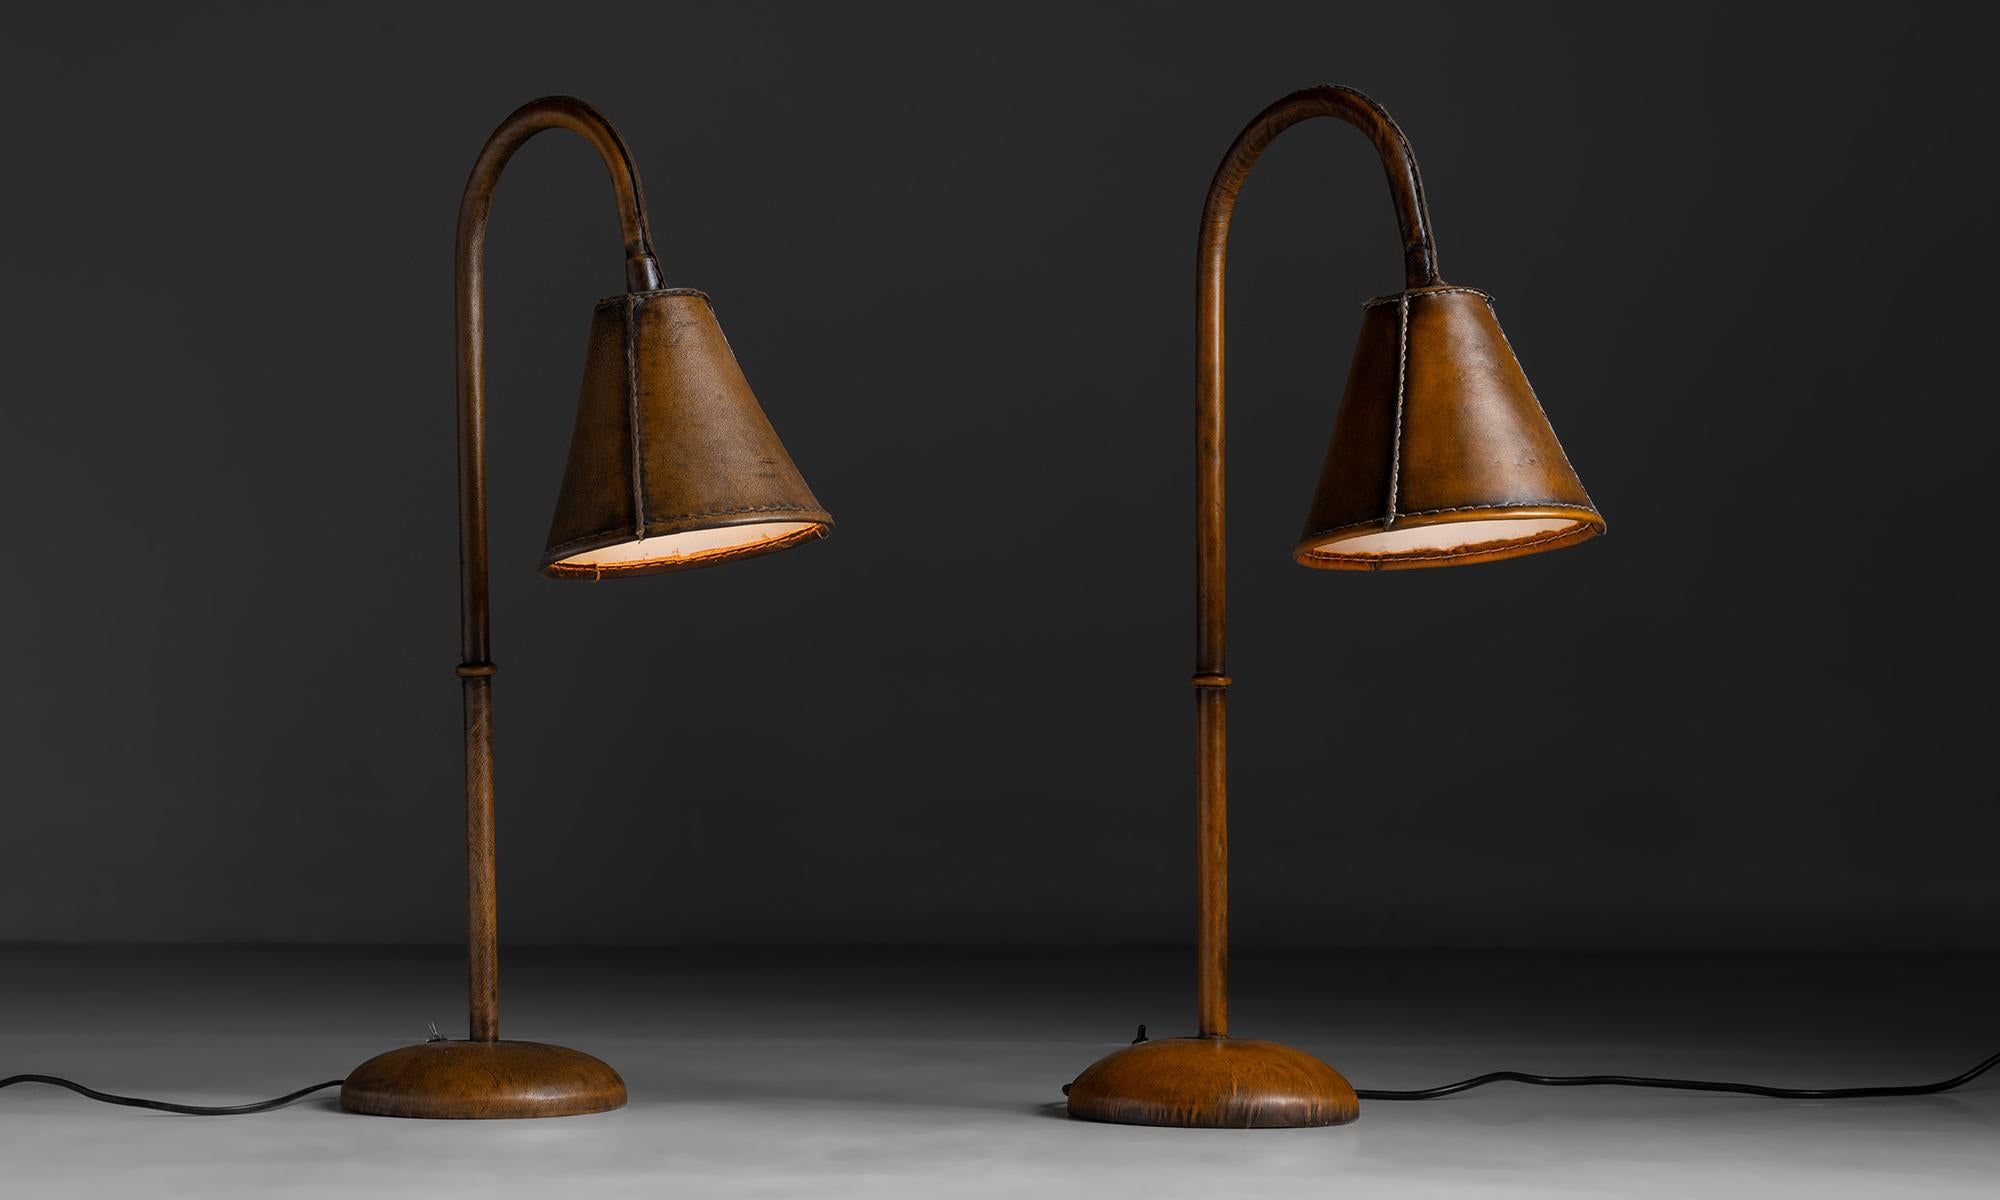 *Please note the price is per unit, lamps are sold separately*

Table Lamps by Valenti

Spain circa 1970

Leather & Steel with embossed label.

Measures 8